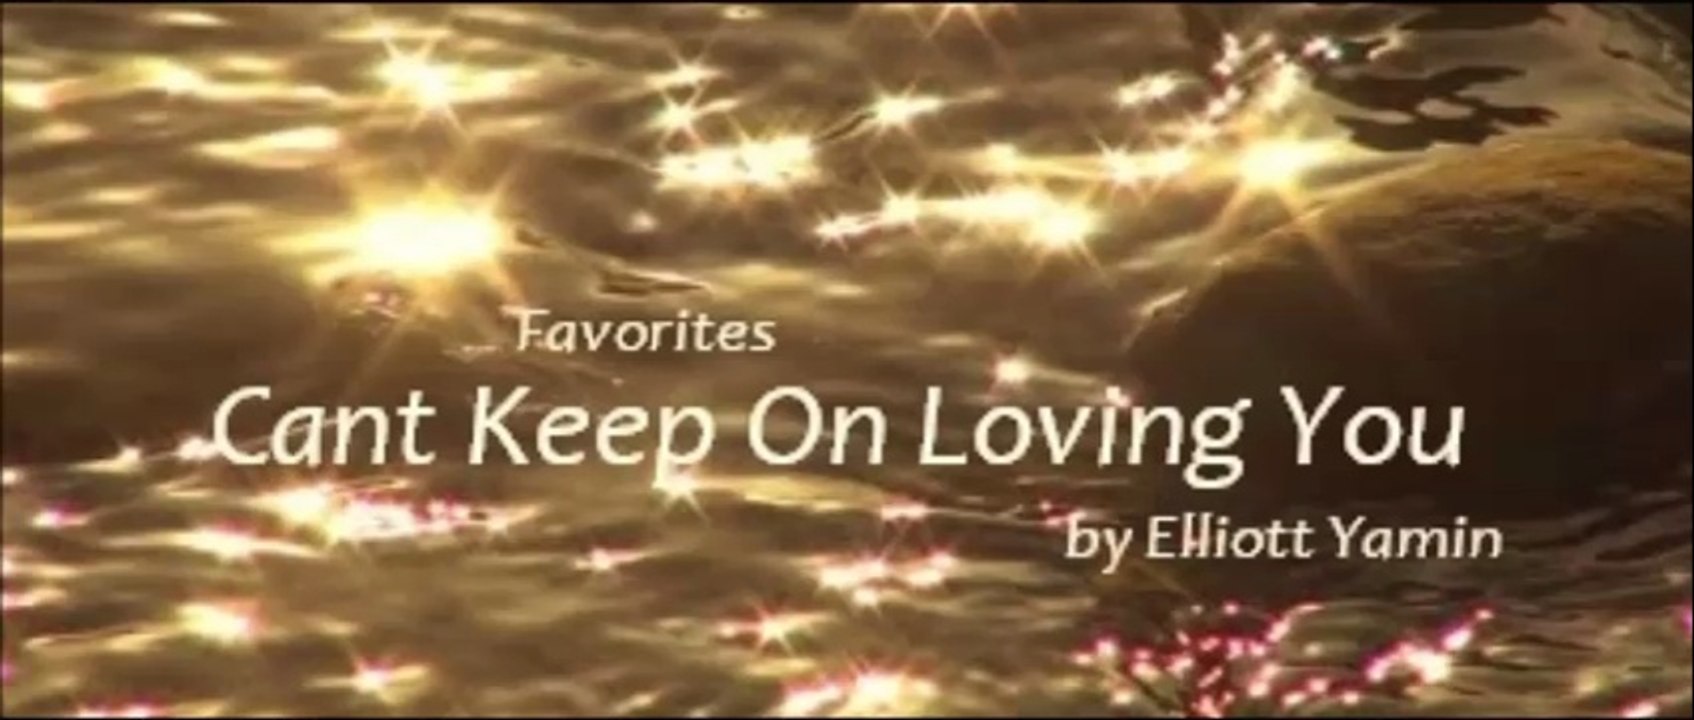 Can´t Keep On Loving You by Elliott Yamin (Favorites)